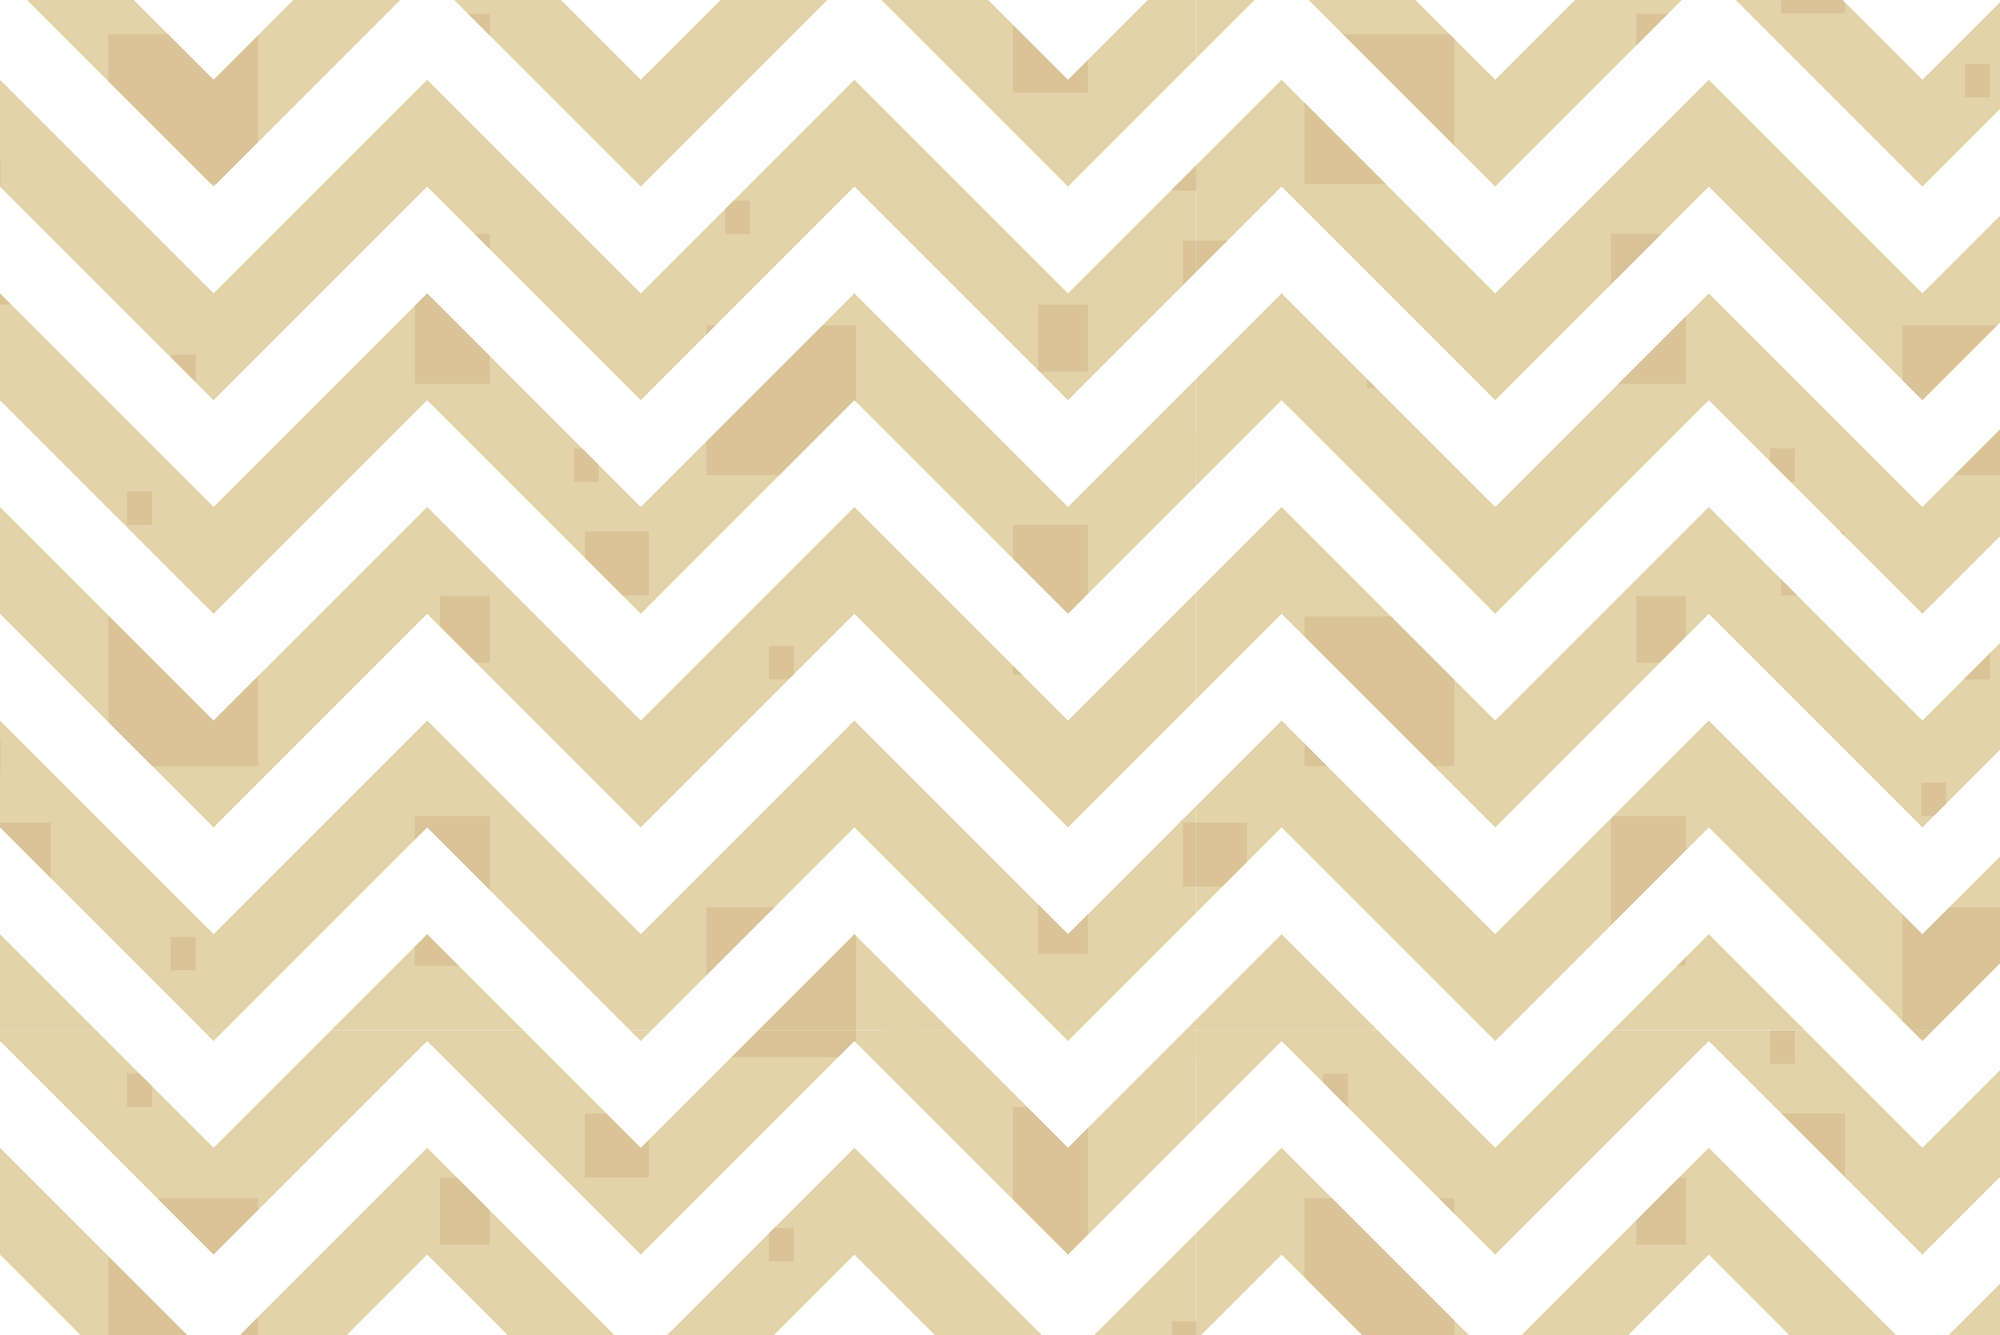             Design wallpaper zig zag pattern with small squares yellow on mother of pearl smooth nonwoven
        